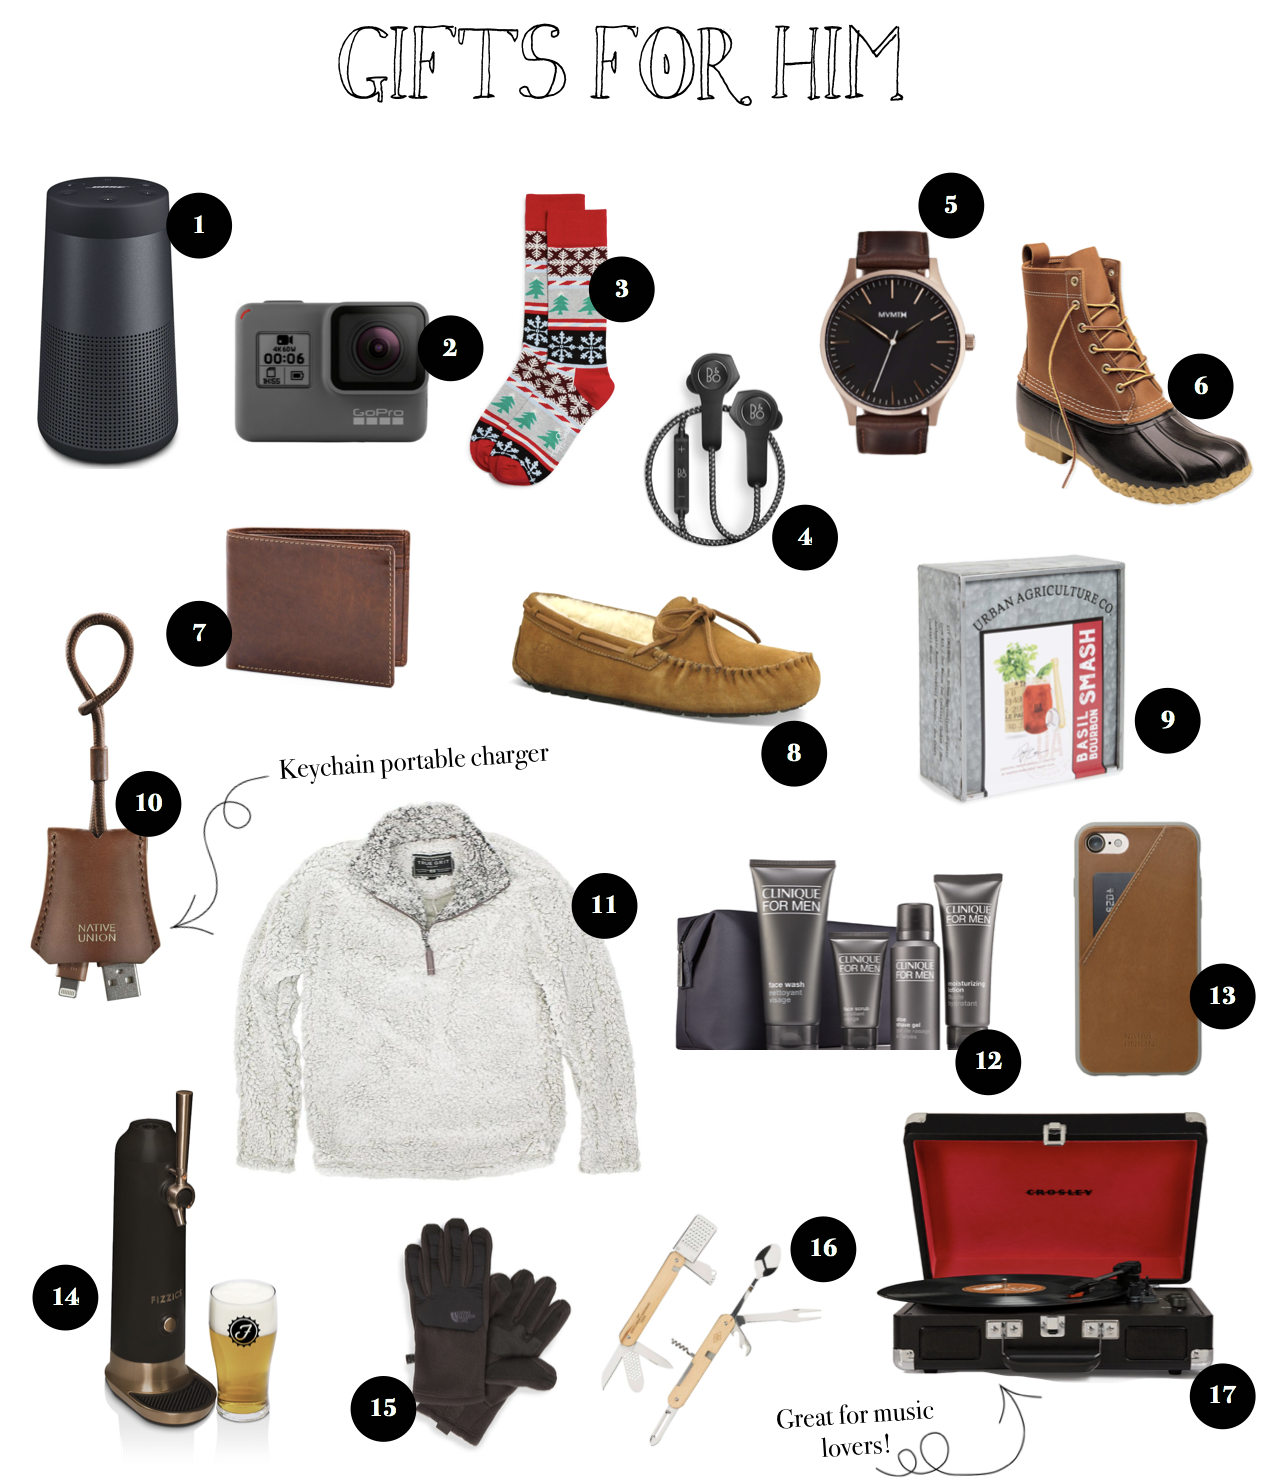 12 Gift Guides of 2017 Gift ideas for him. The husband, boyfriend, brother, uncle, grandpa, or guy friend in your life! on fashion blog daily dose of charm by lauren lindmark